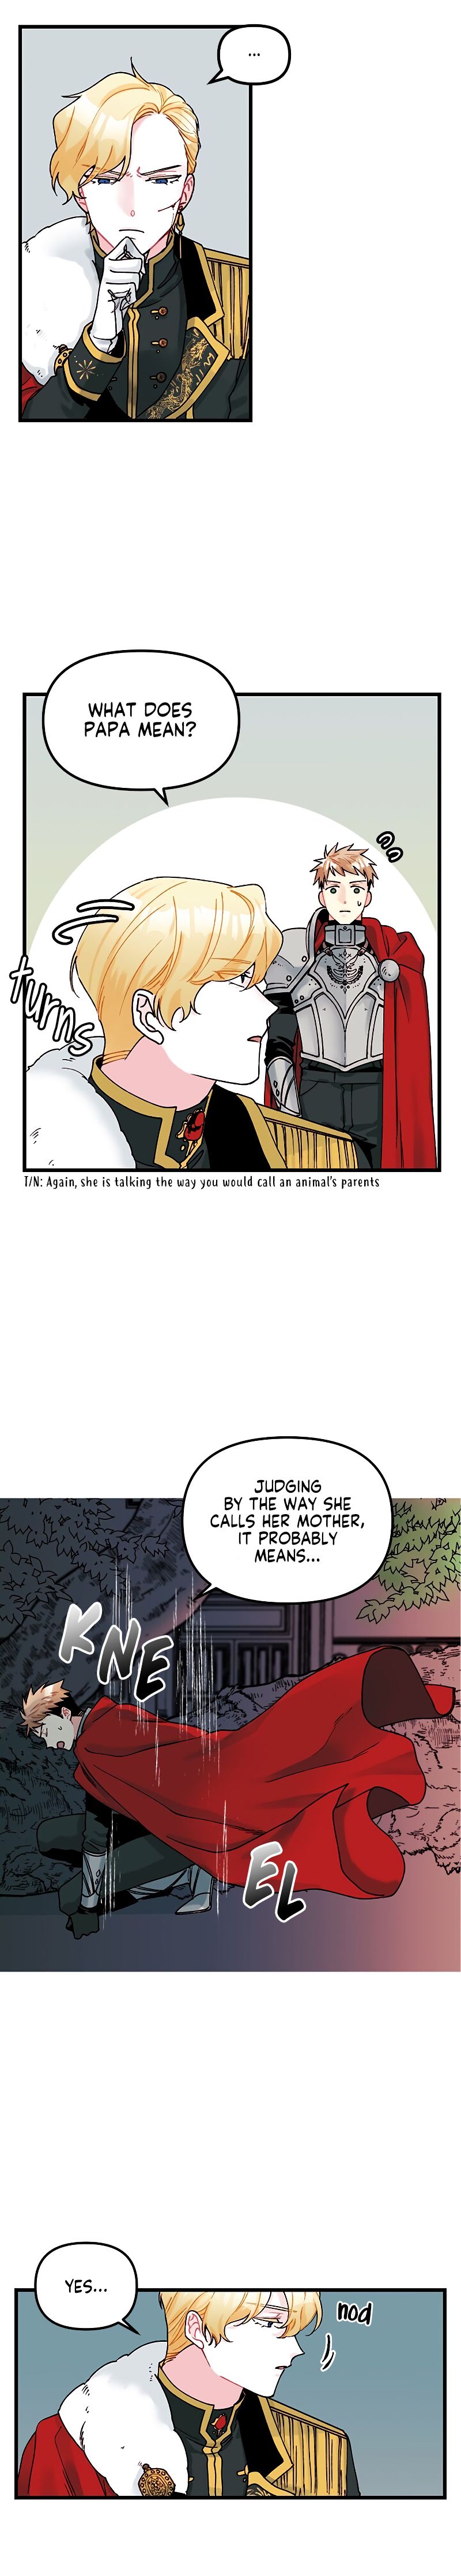 The Princess in the Dumpster - Chapter 5 Page 6